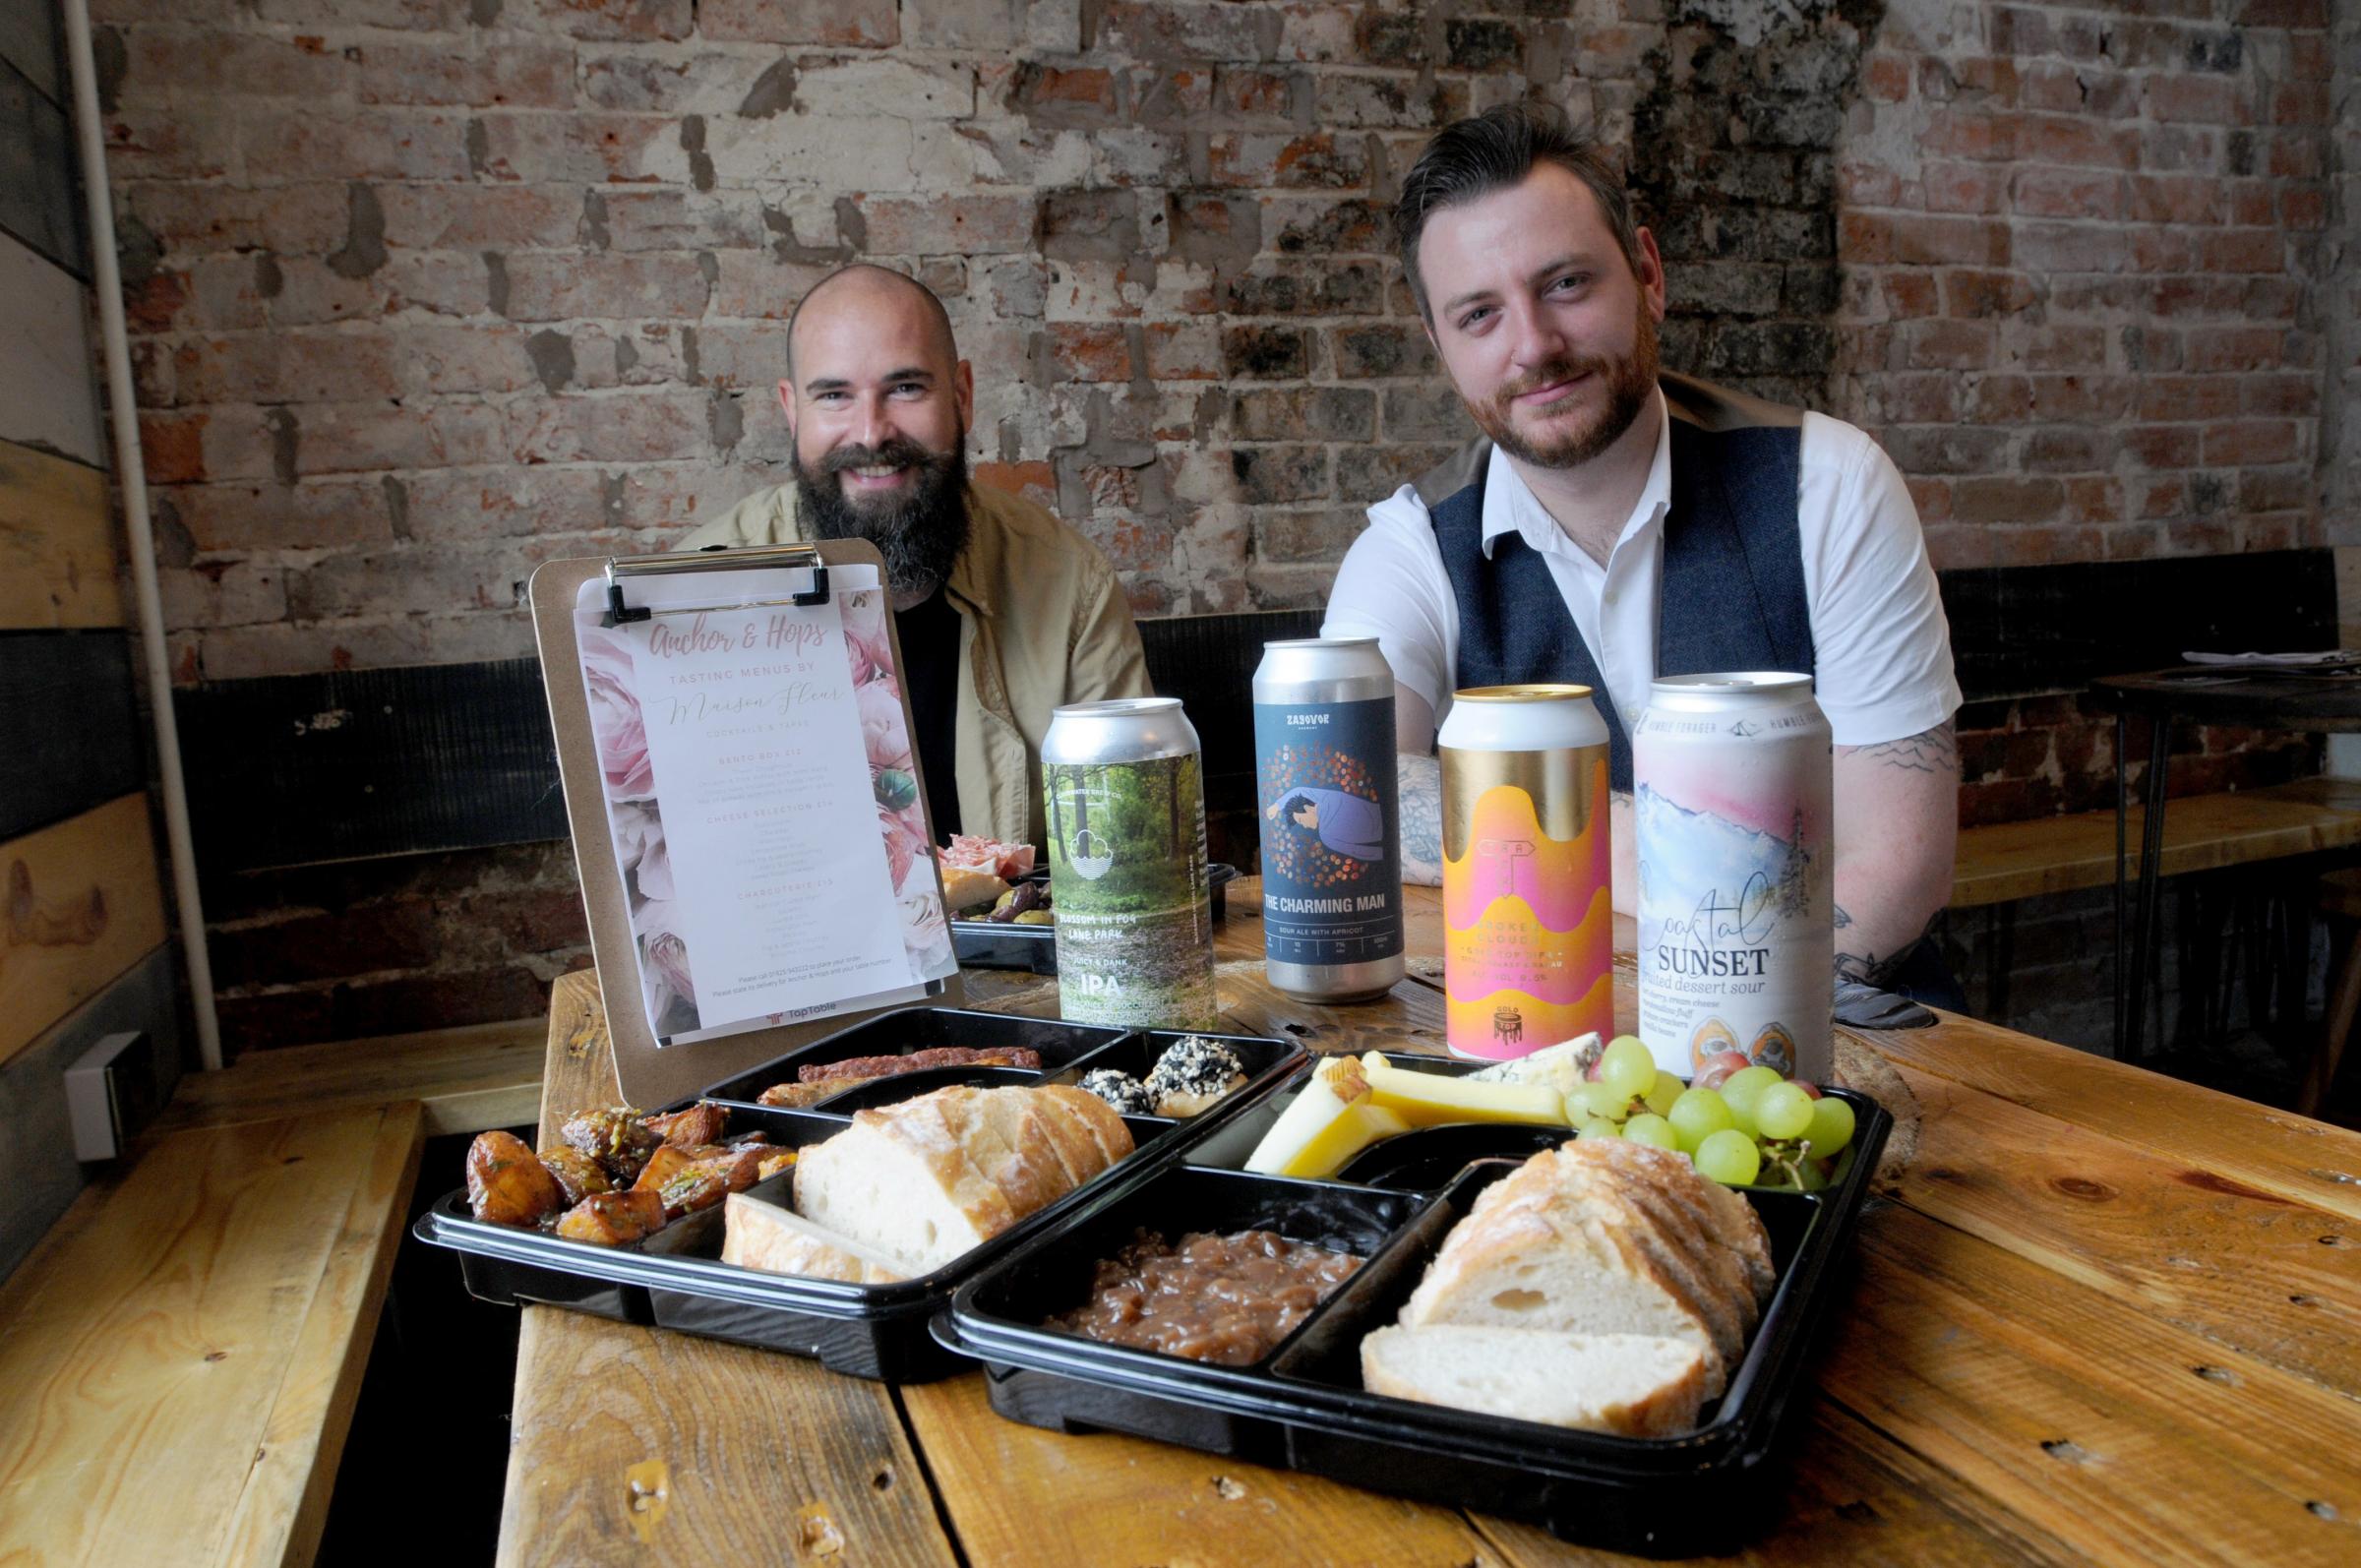 Chris Kelly, from Anchor and Hops, and Nick Gerald, restaurant manager of Maison Fleur